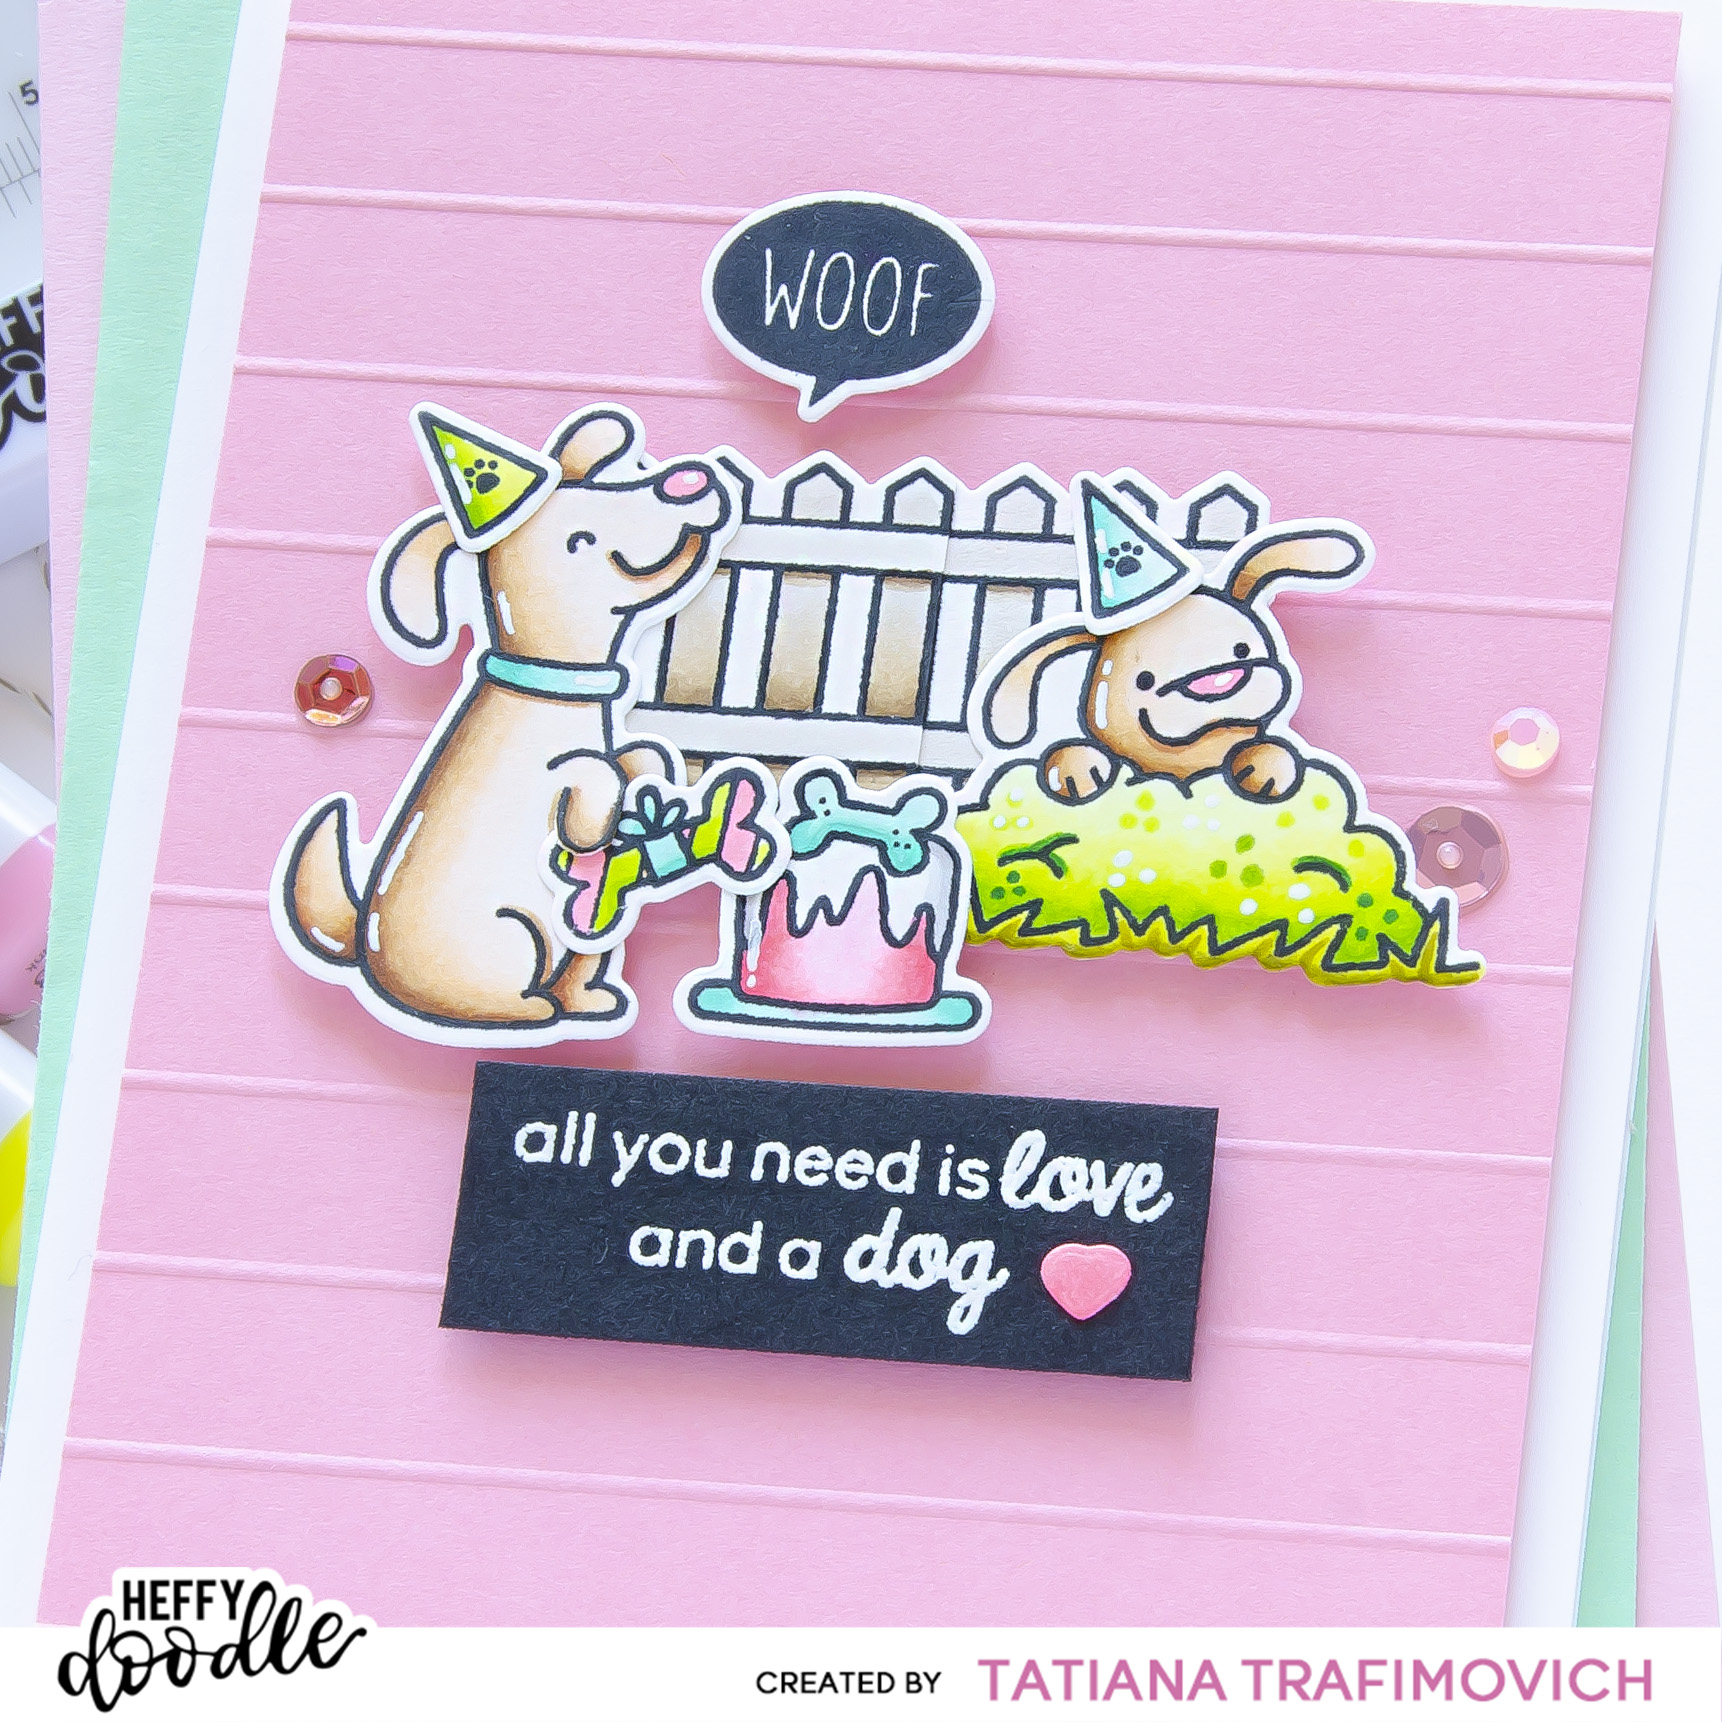 All You Need Is Love And A Dog #handmade card by Tatiana Trafimovich #tatianacraftandart #tatianagraphicdesign - stamps and dies by Heffy Doodle #heffydoodle